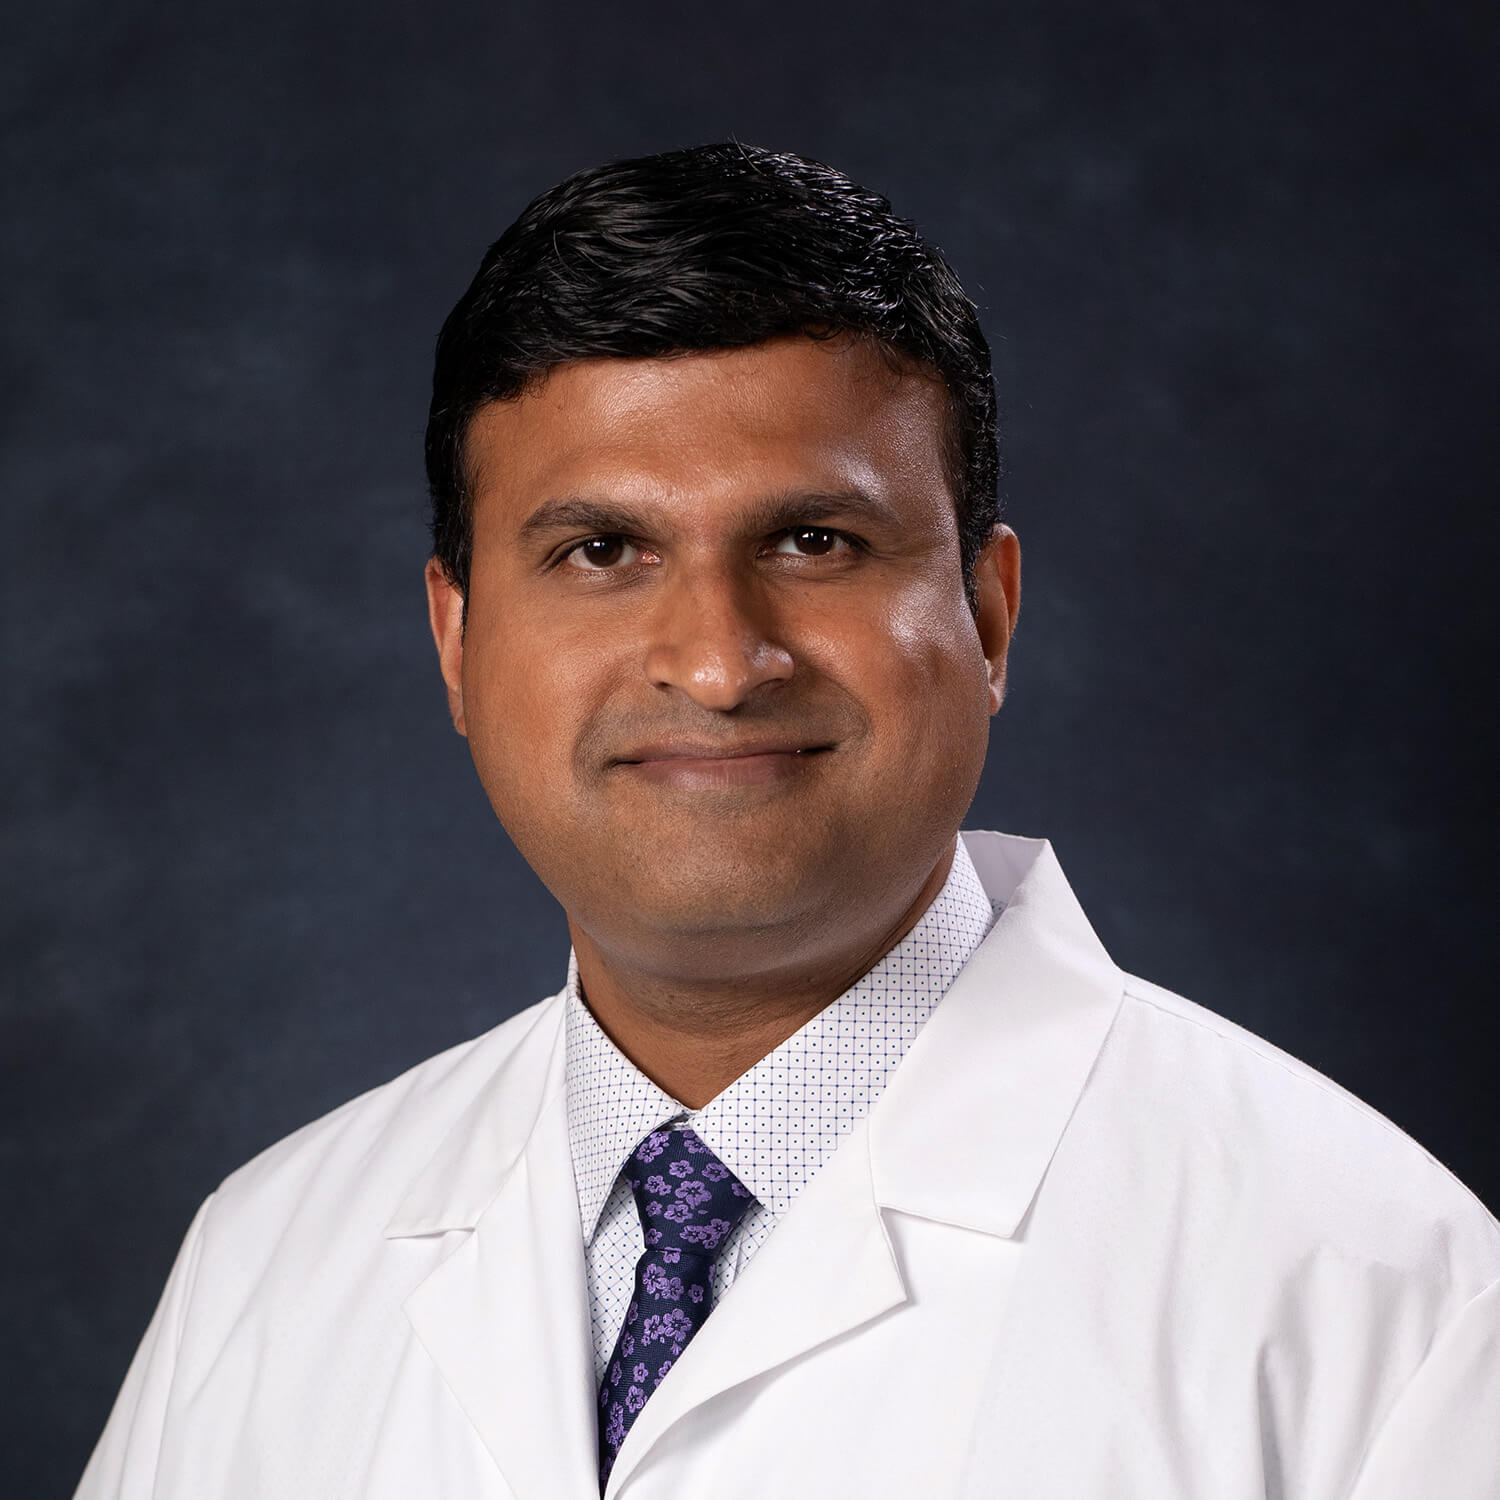 Portrait of Gopinathan Nambiar, M.D.